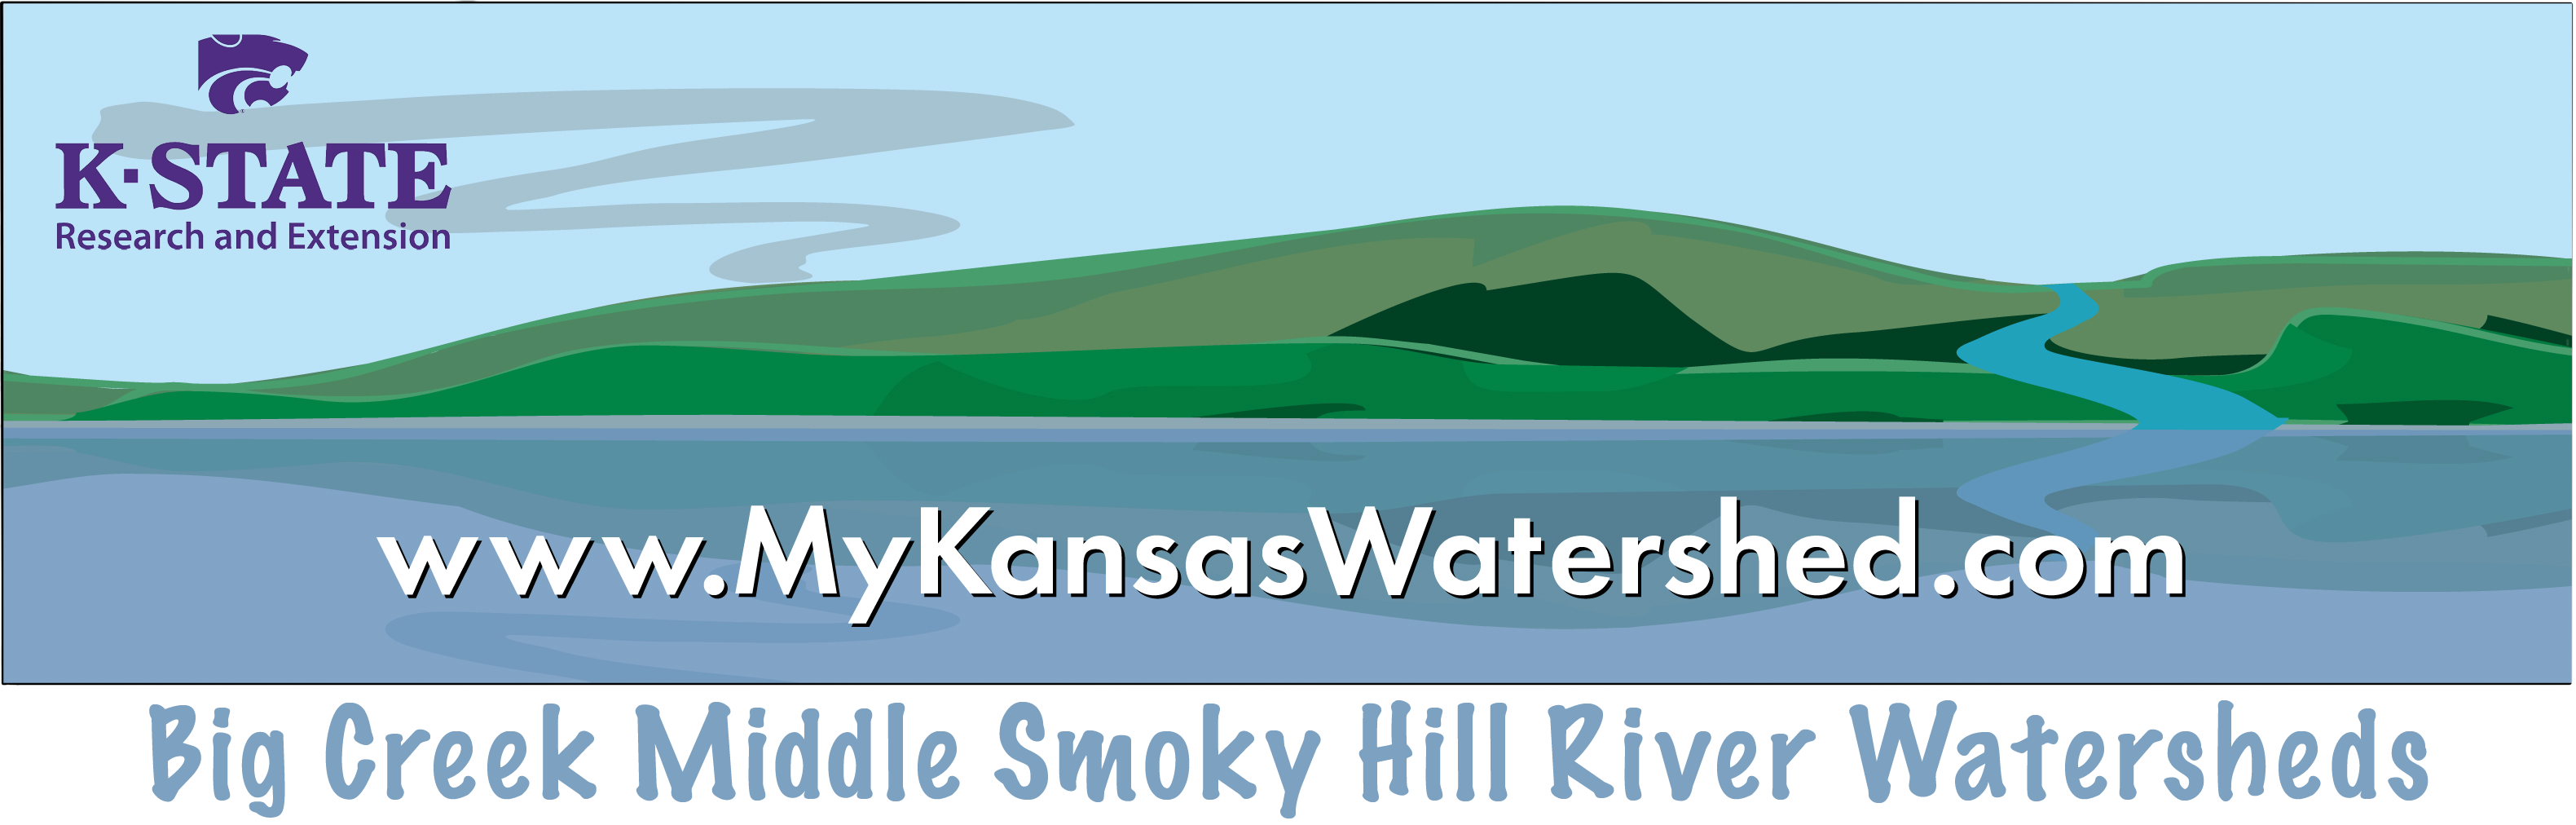 Big Creek Middle Smoky Hill River watershed logo